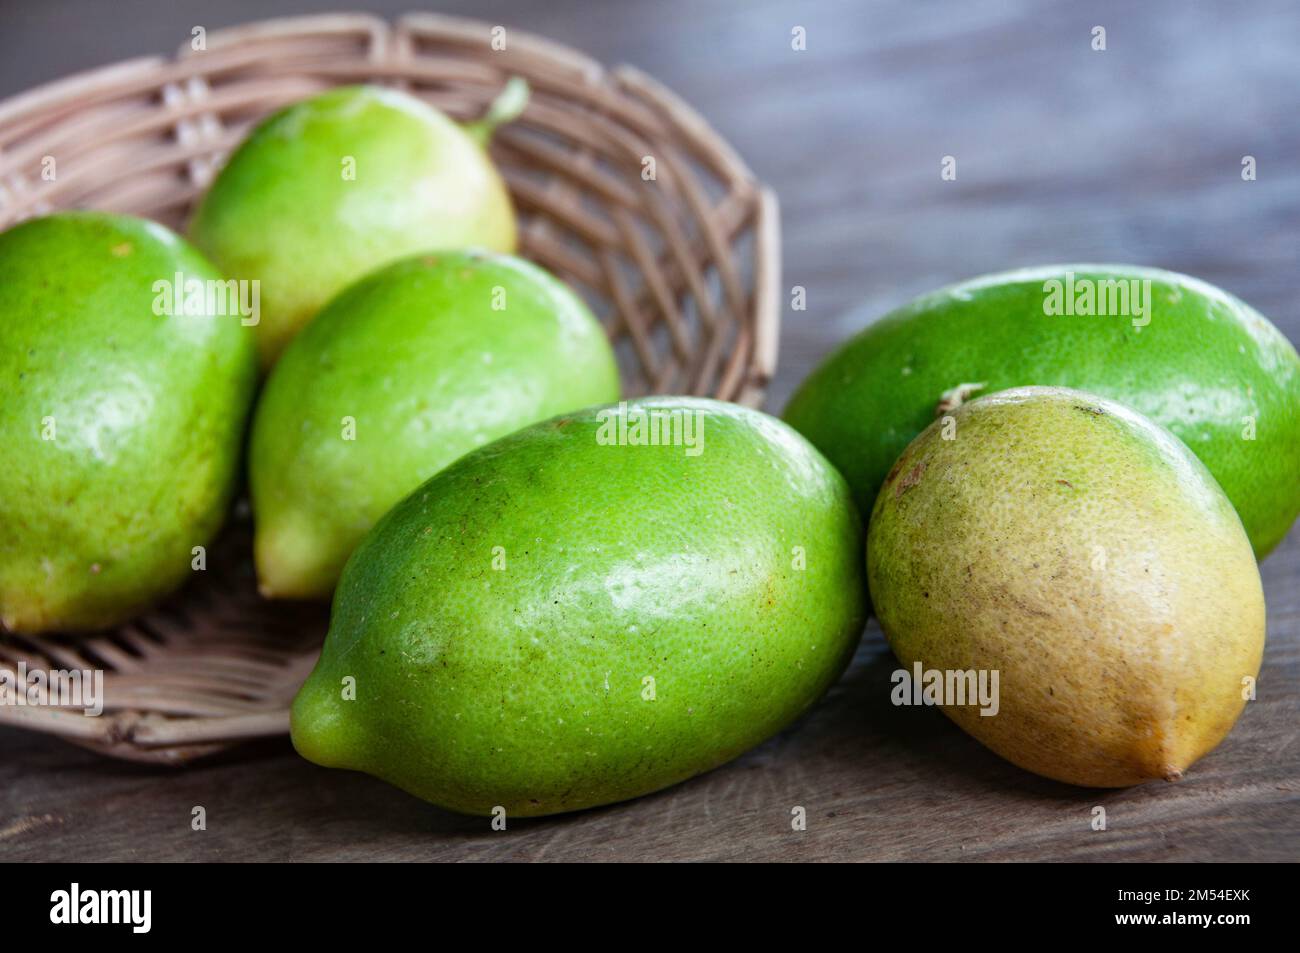 Close up of lemons on wooden basket. Asian food concept Stock Photo